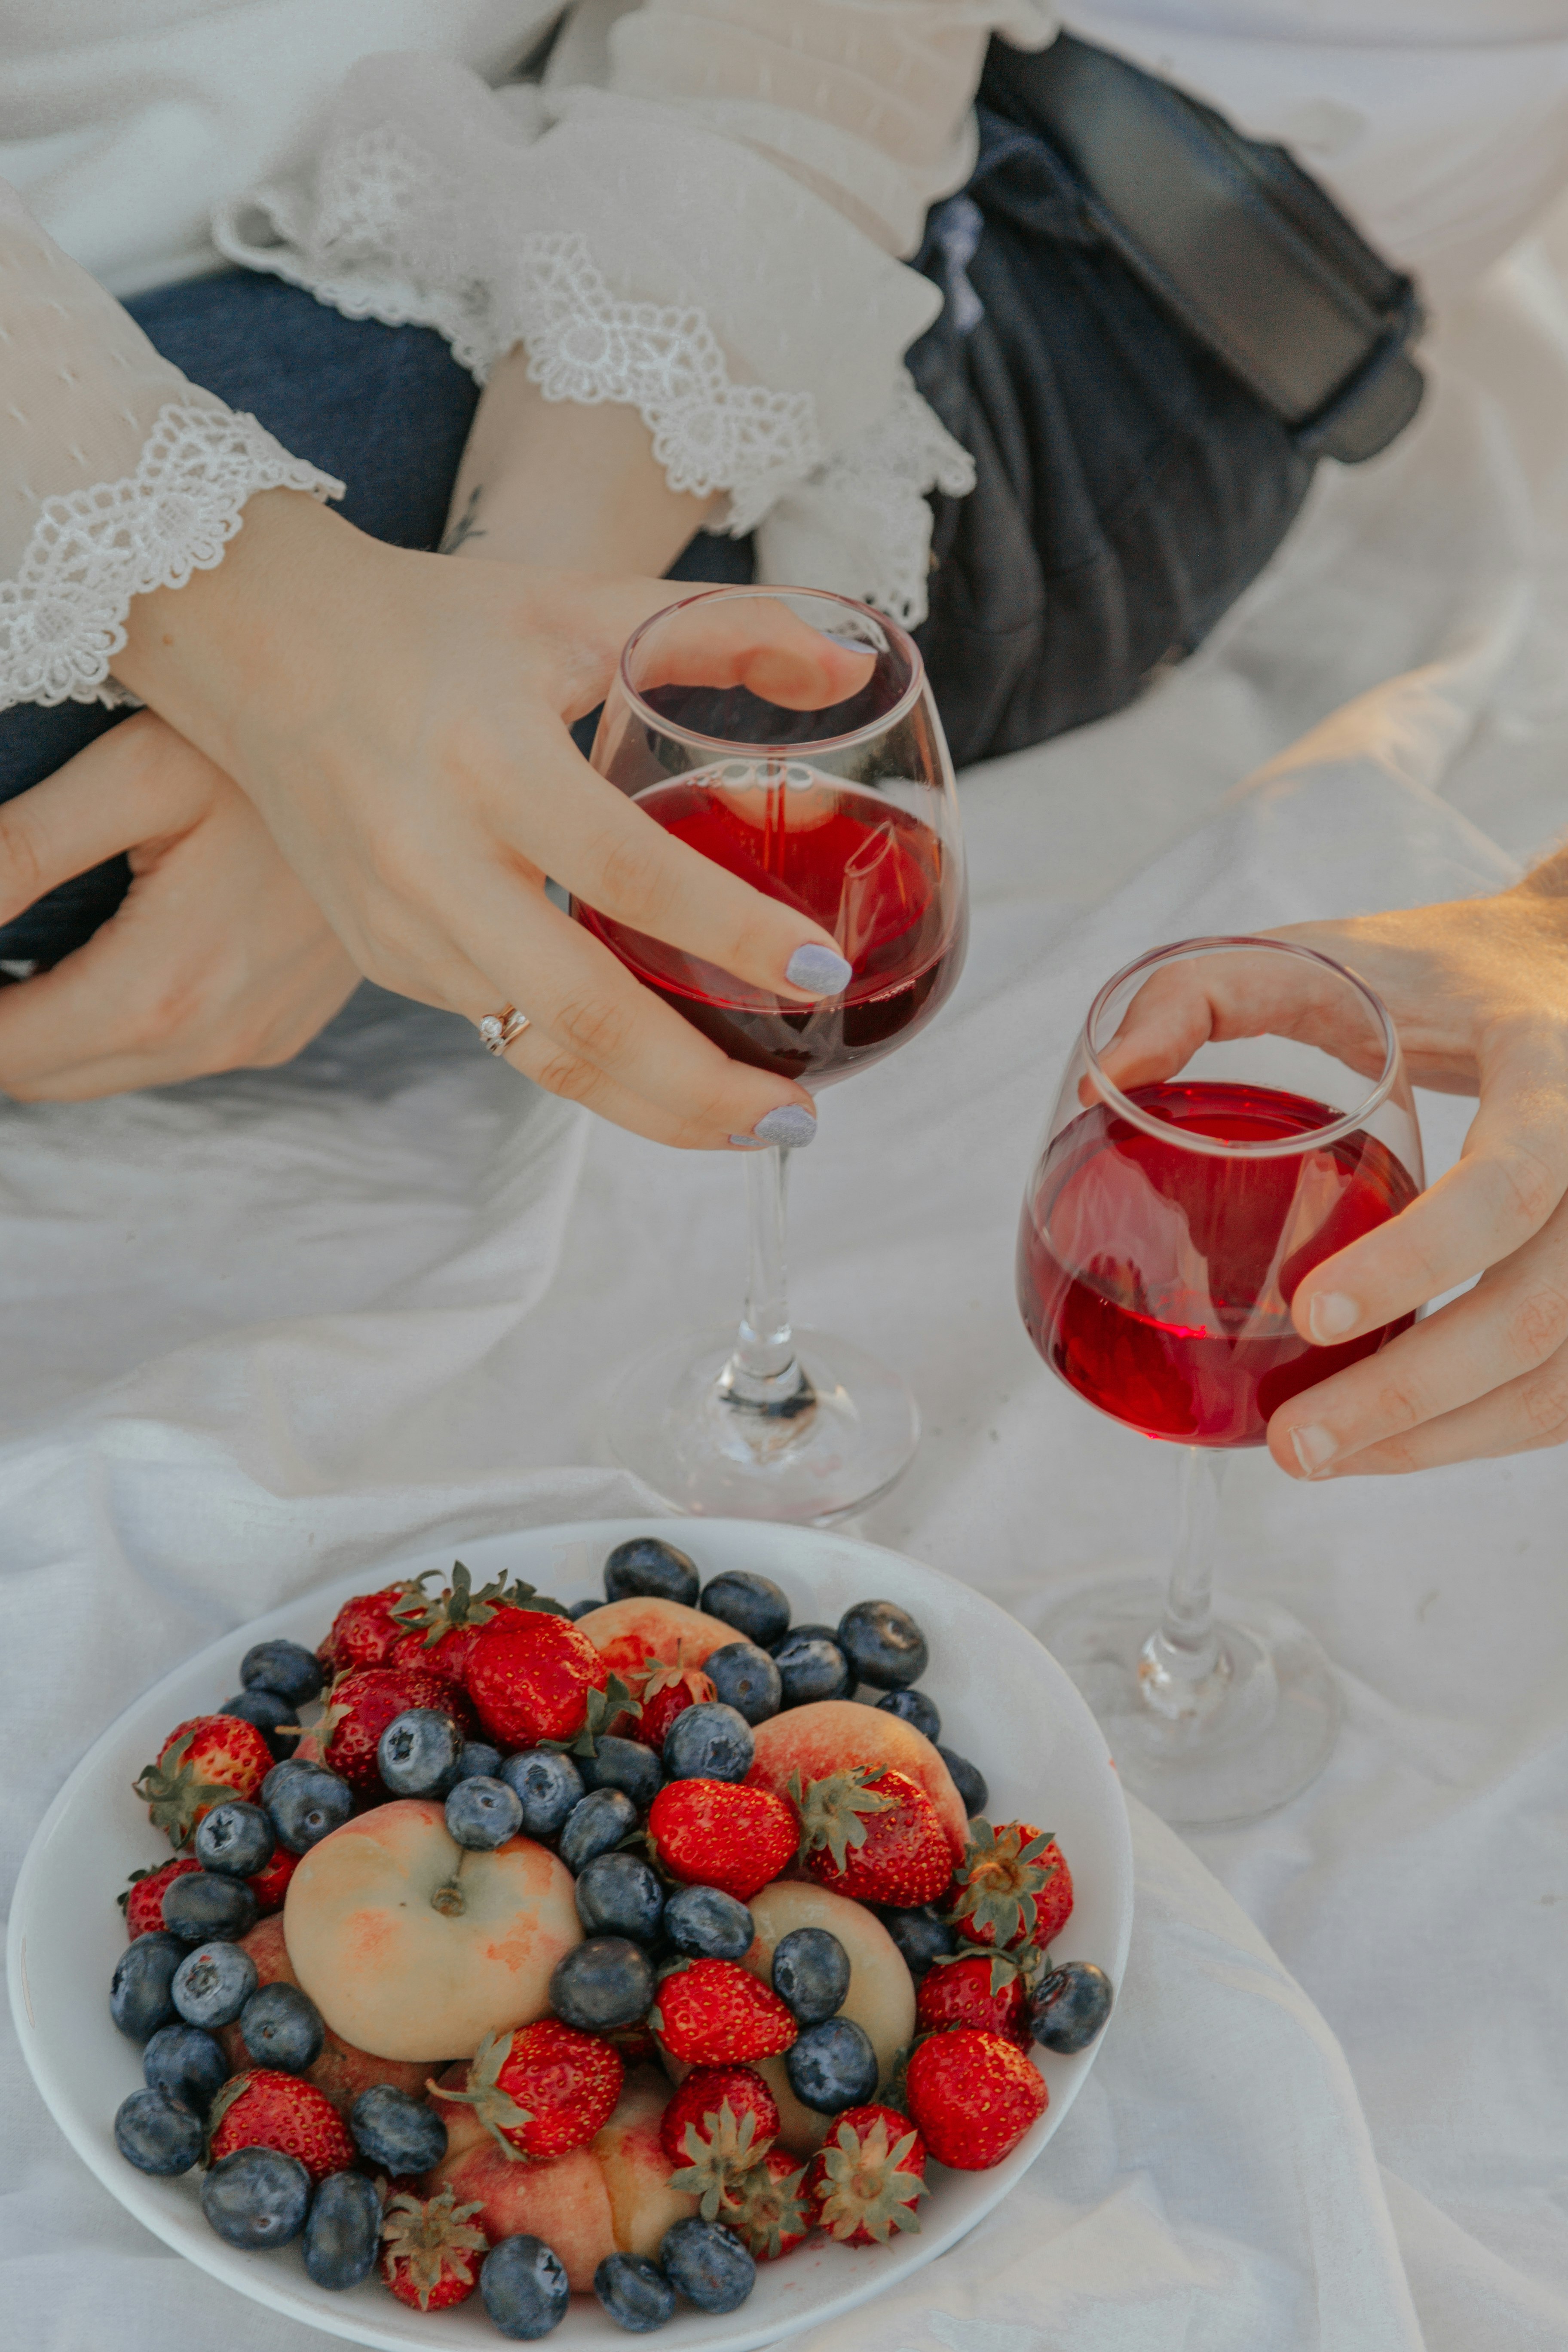 woman in white wedding dress holding red wine glass with red liquid